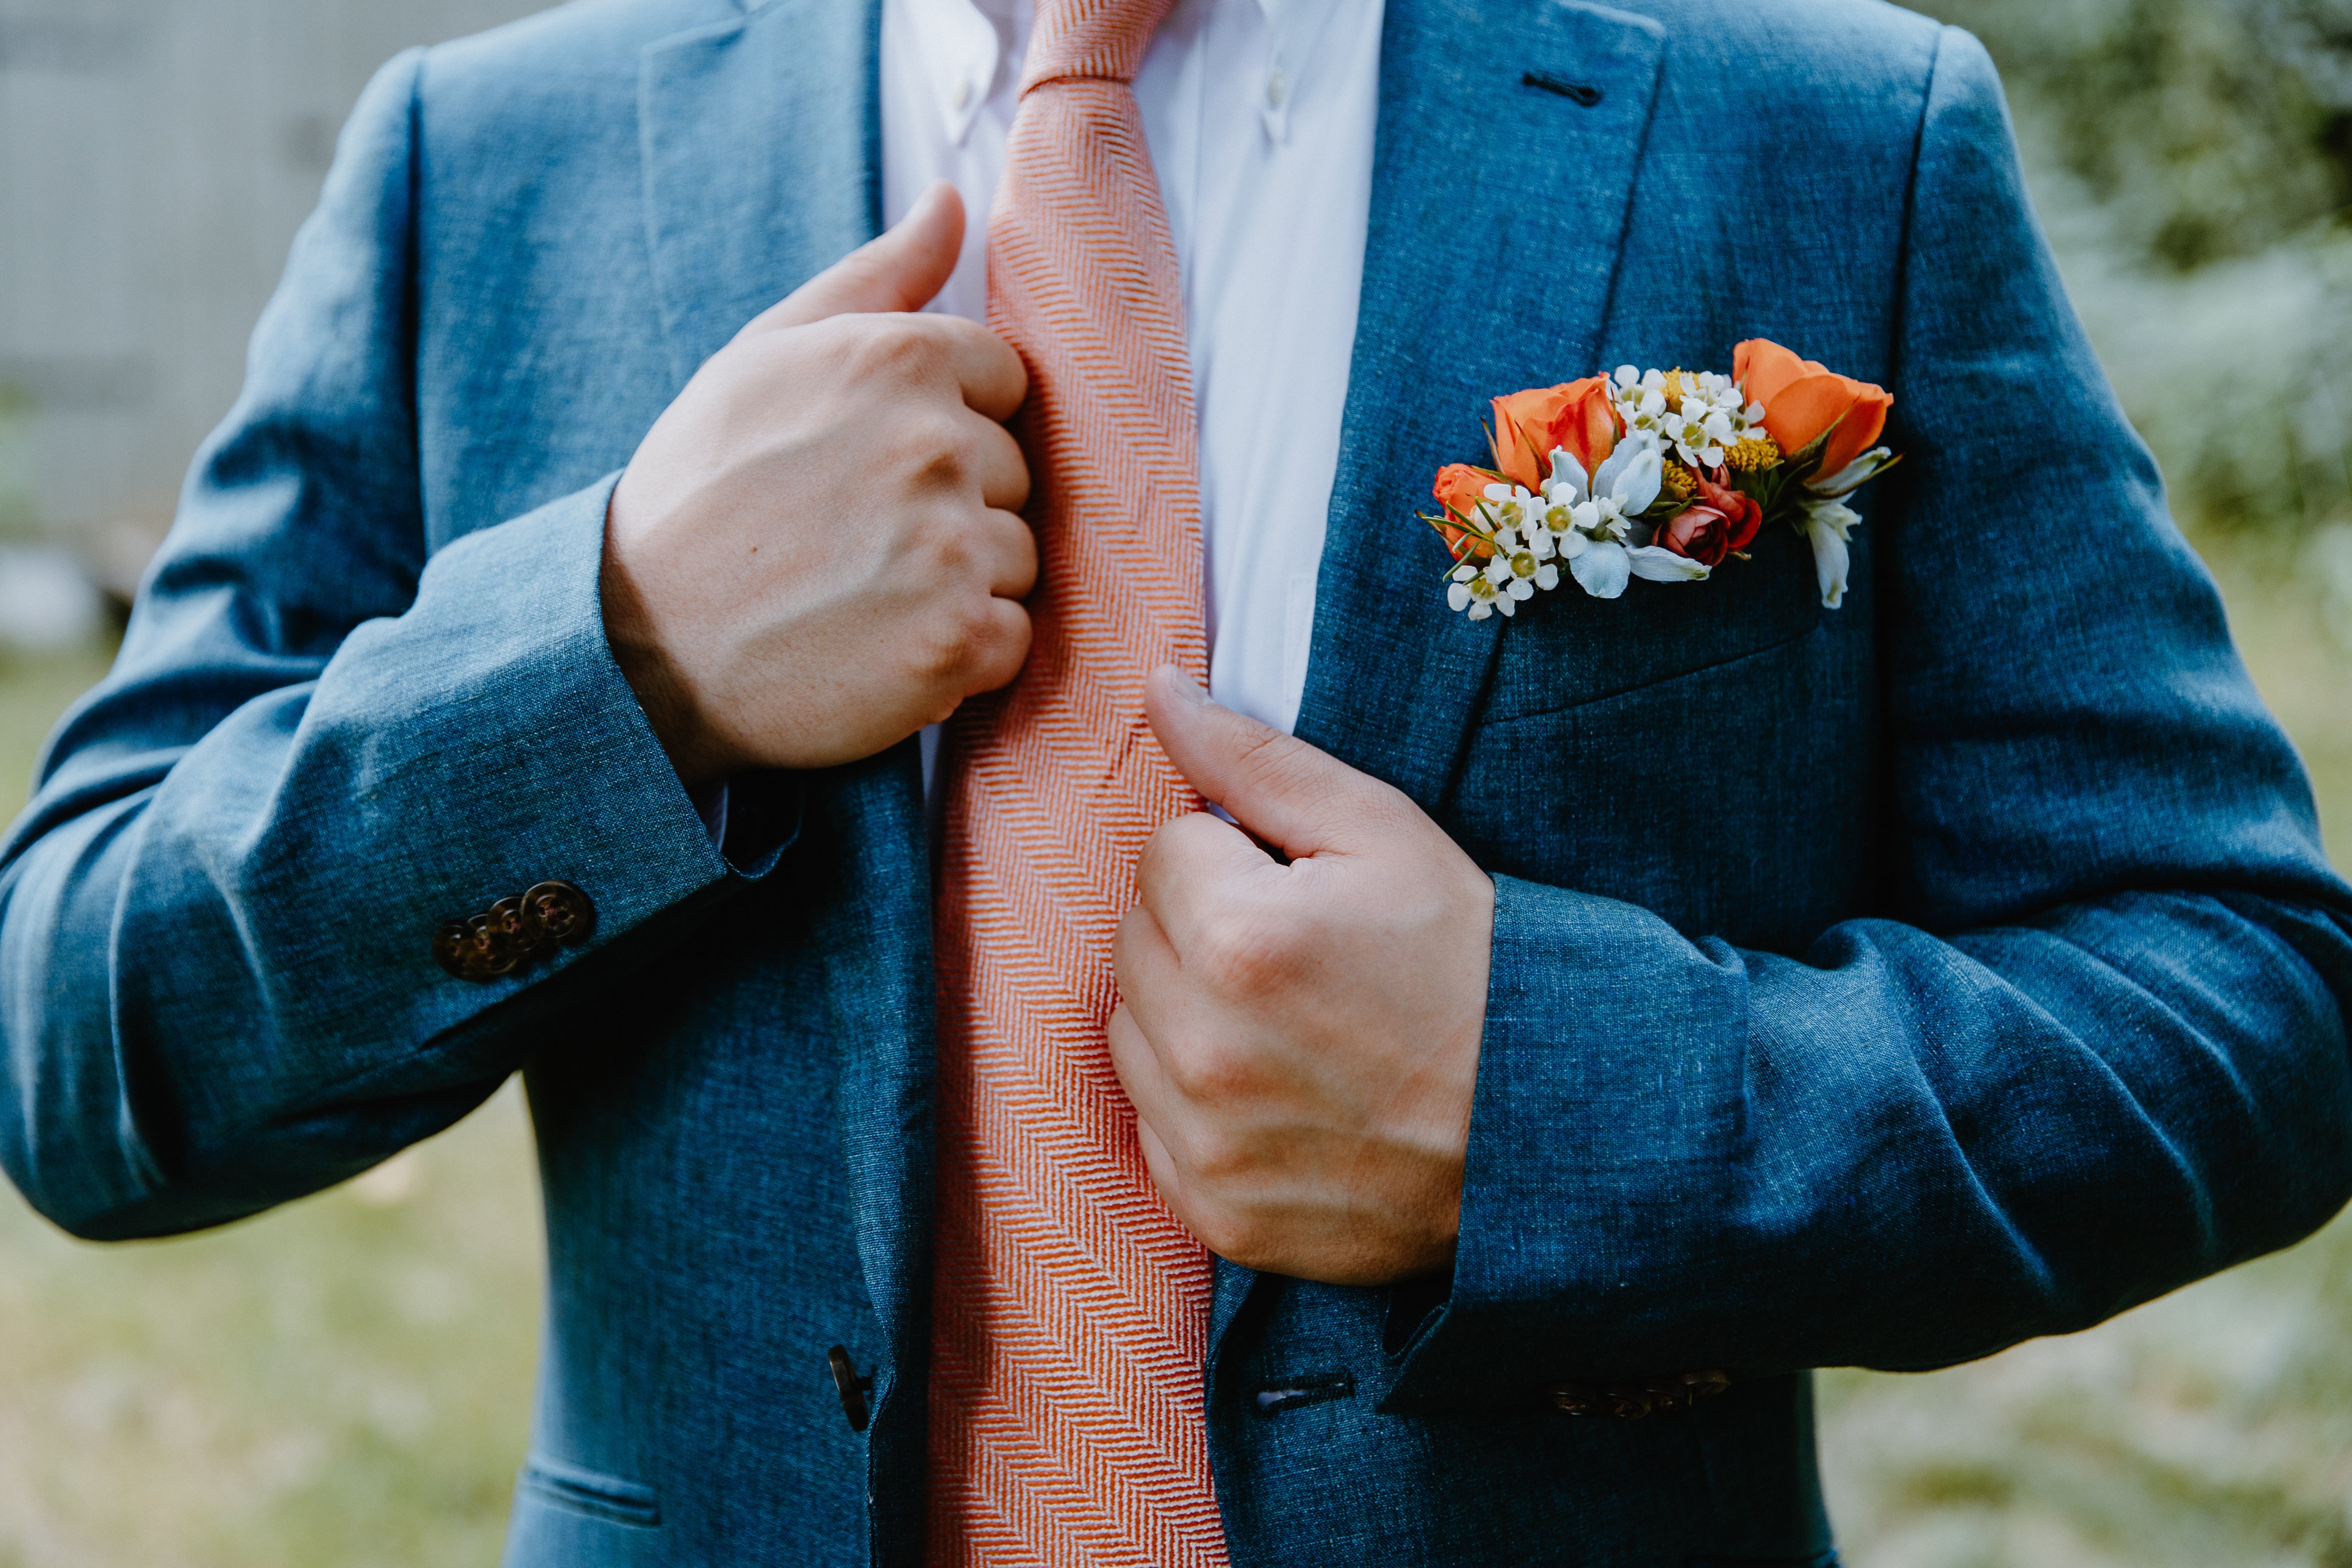 Image of a pocket swuare floral in a suit jacket. the image is zoomed in on the pocket square floral. It has orange and bright flowers, against a blue suit.